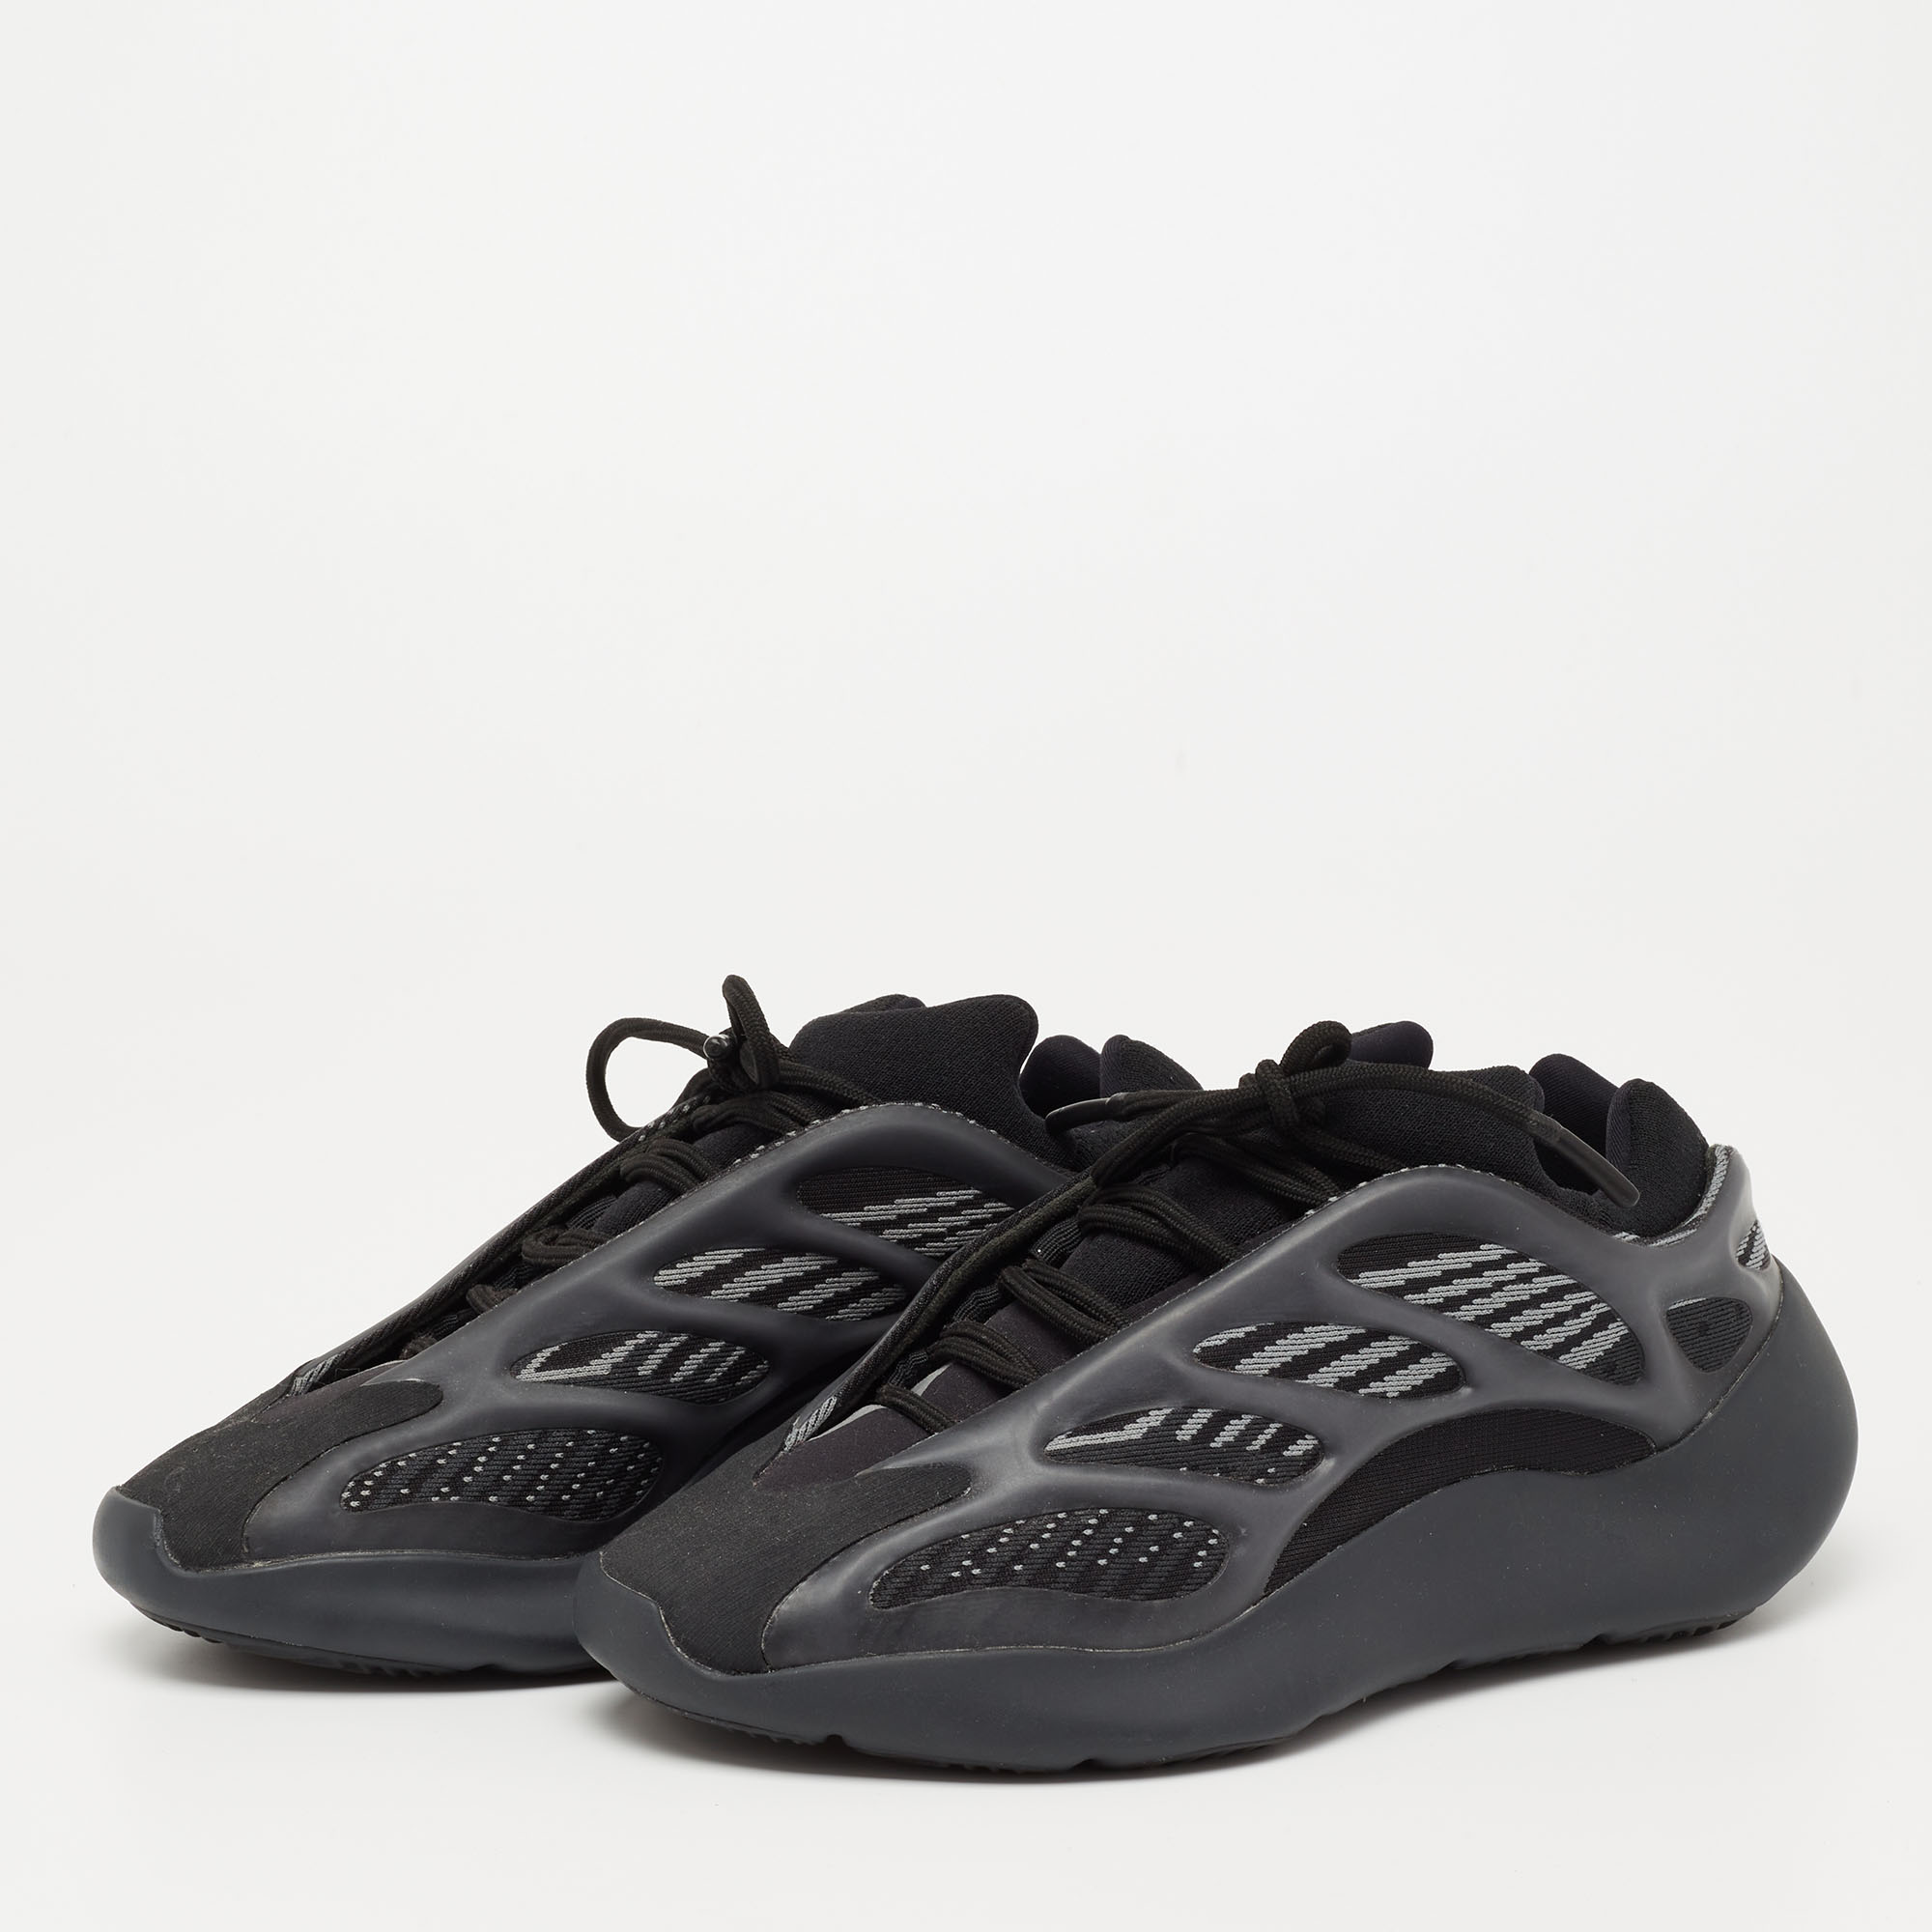 

Yeezy x Adidas Black Mesh And Knit Fabric Yeezy 700 V3 Alvah Sneakers Size 38 2/3